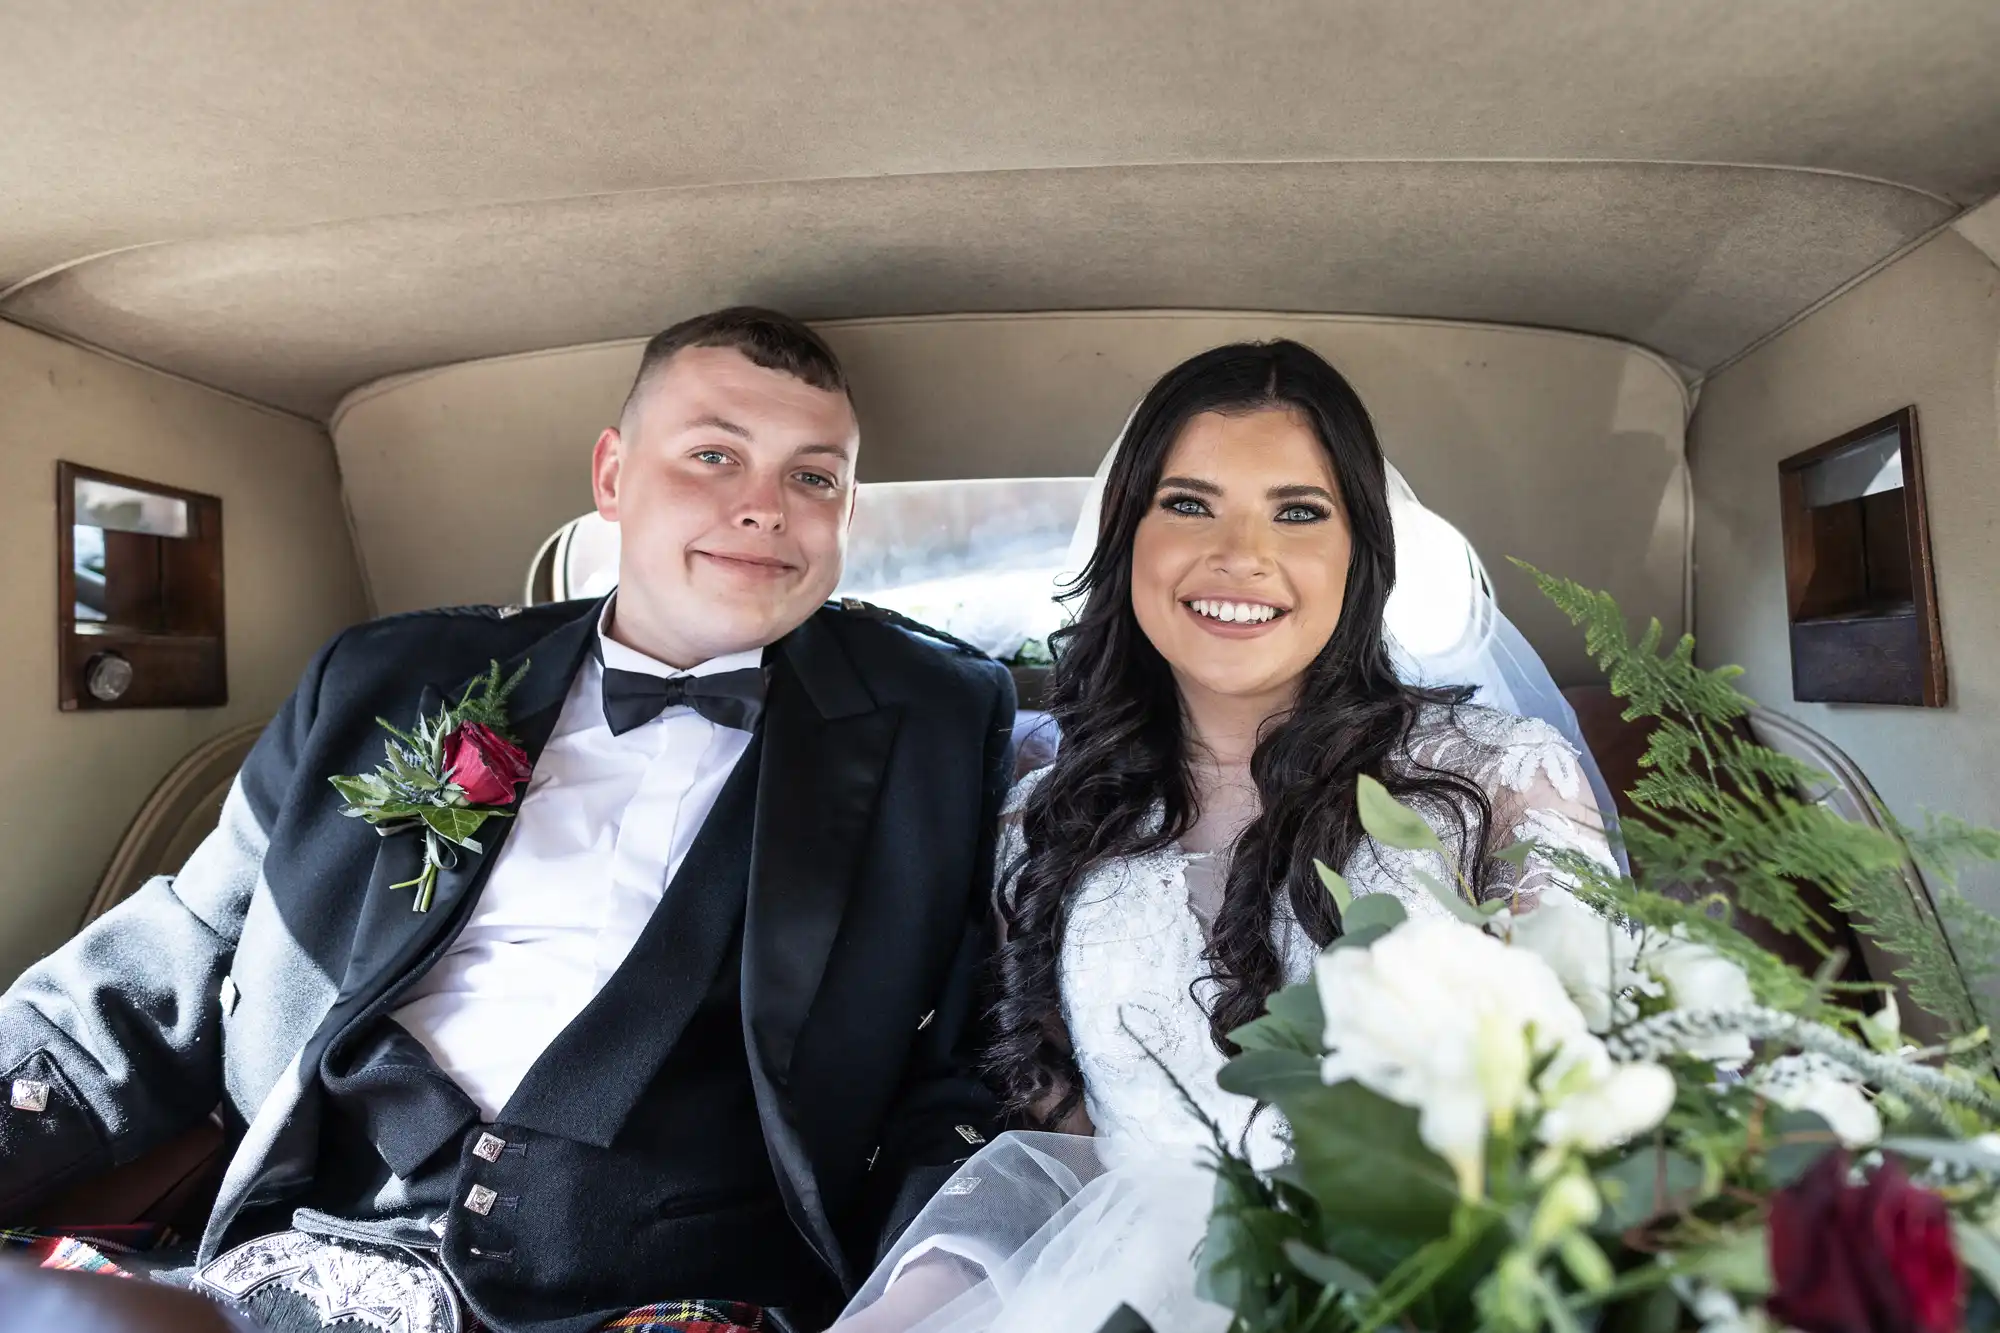 A bride and groom smiling inside a vintage car, with the bride holding a bouquet of flowers.